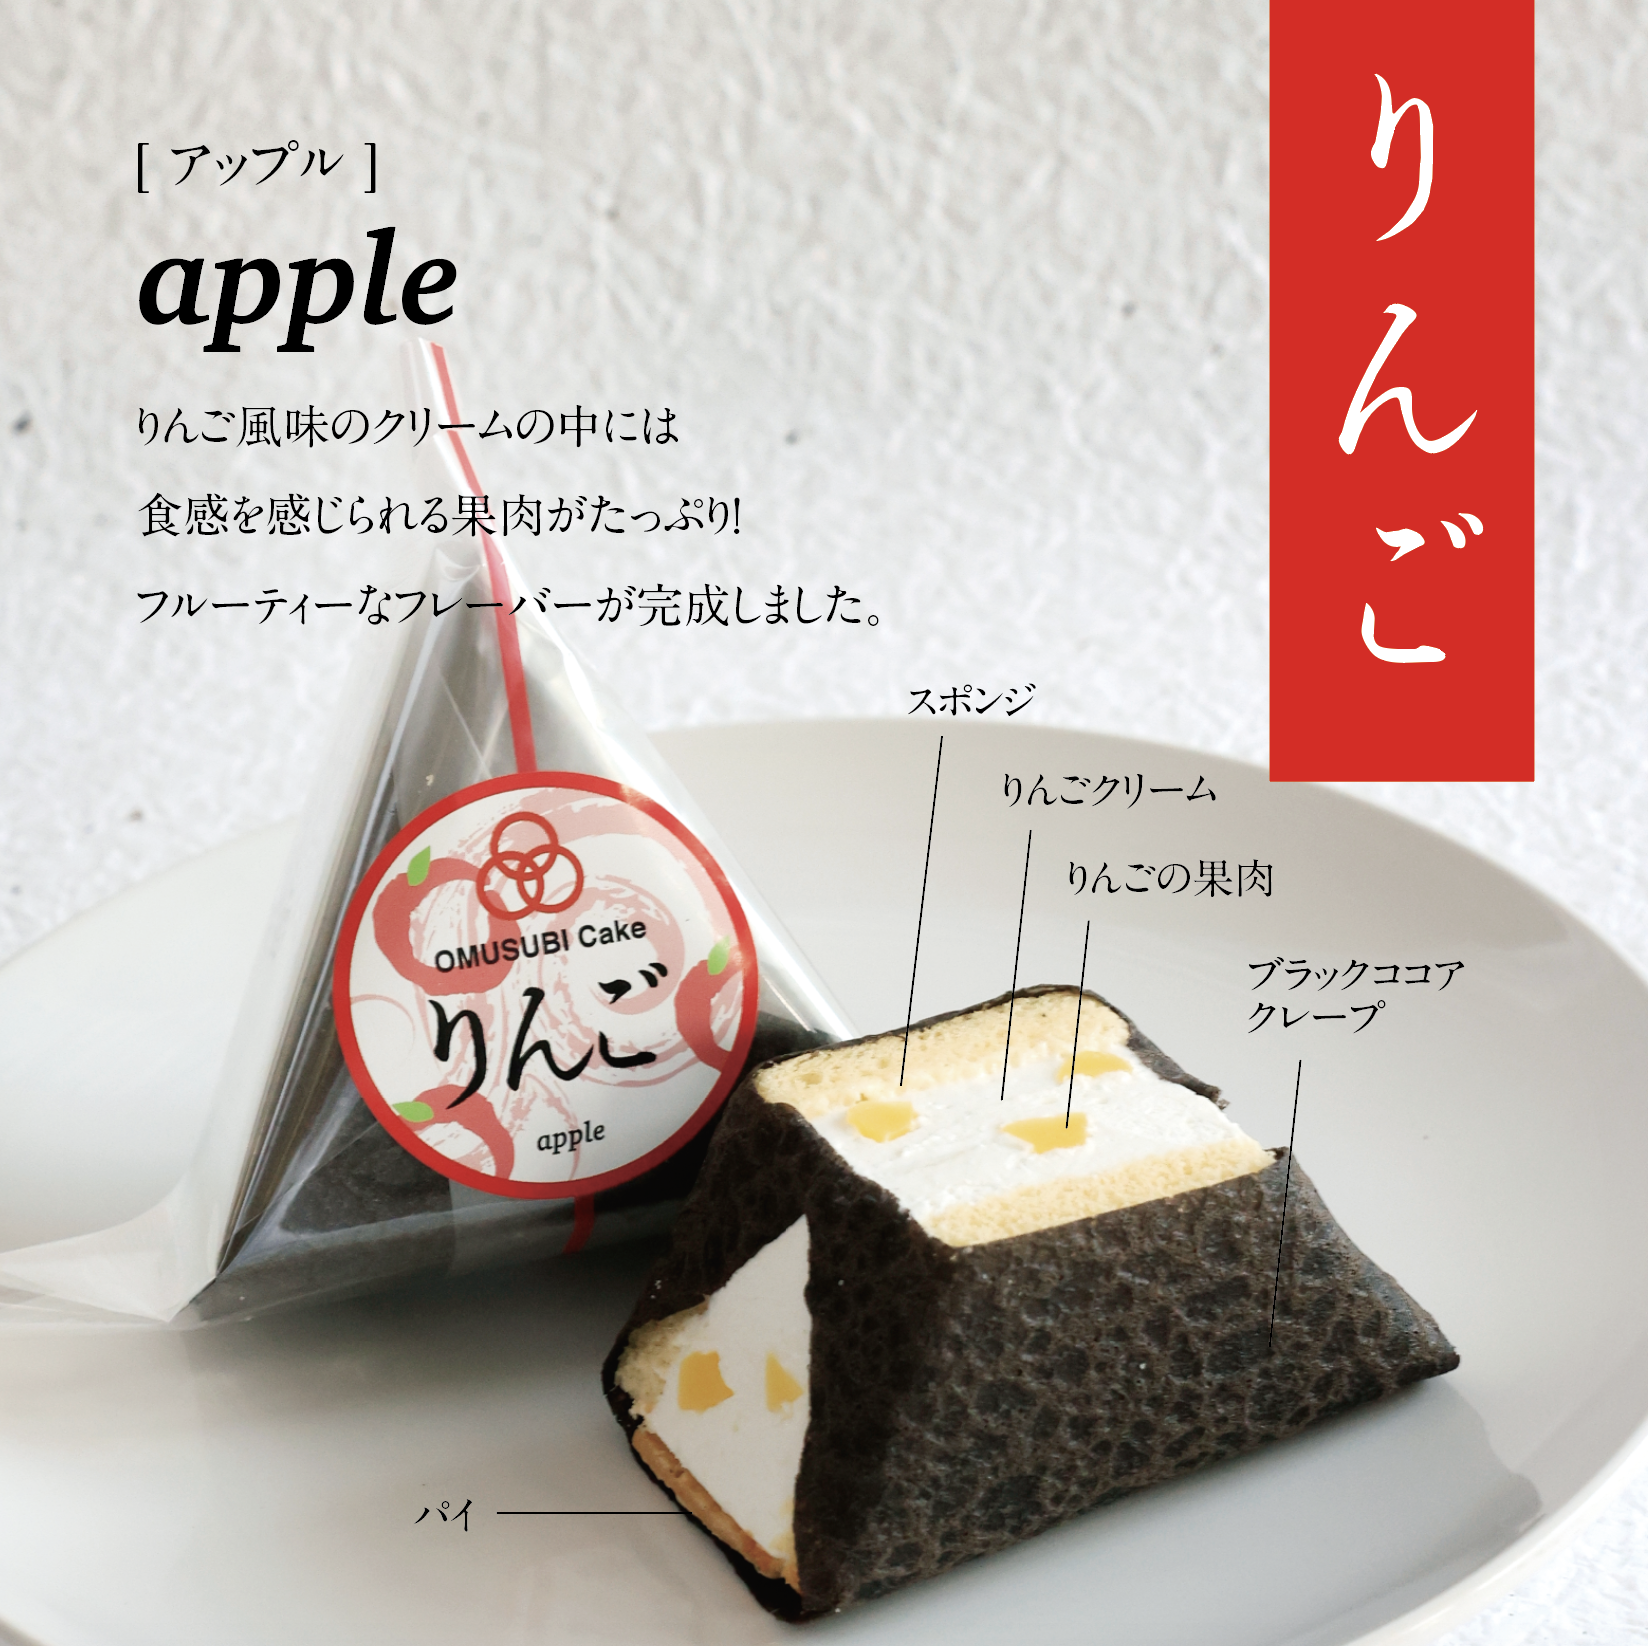 https://assets.cake.jp/bp/itemimg/10884/1960103204612f399c07a0220210901.png 4